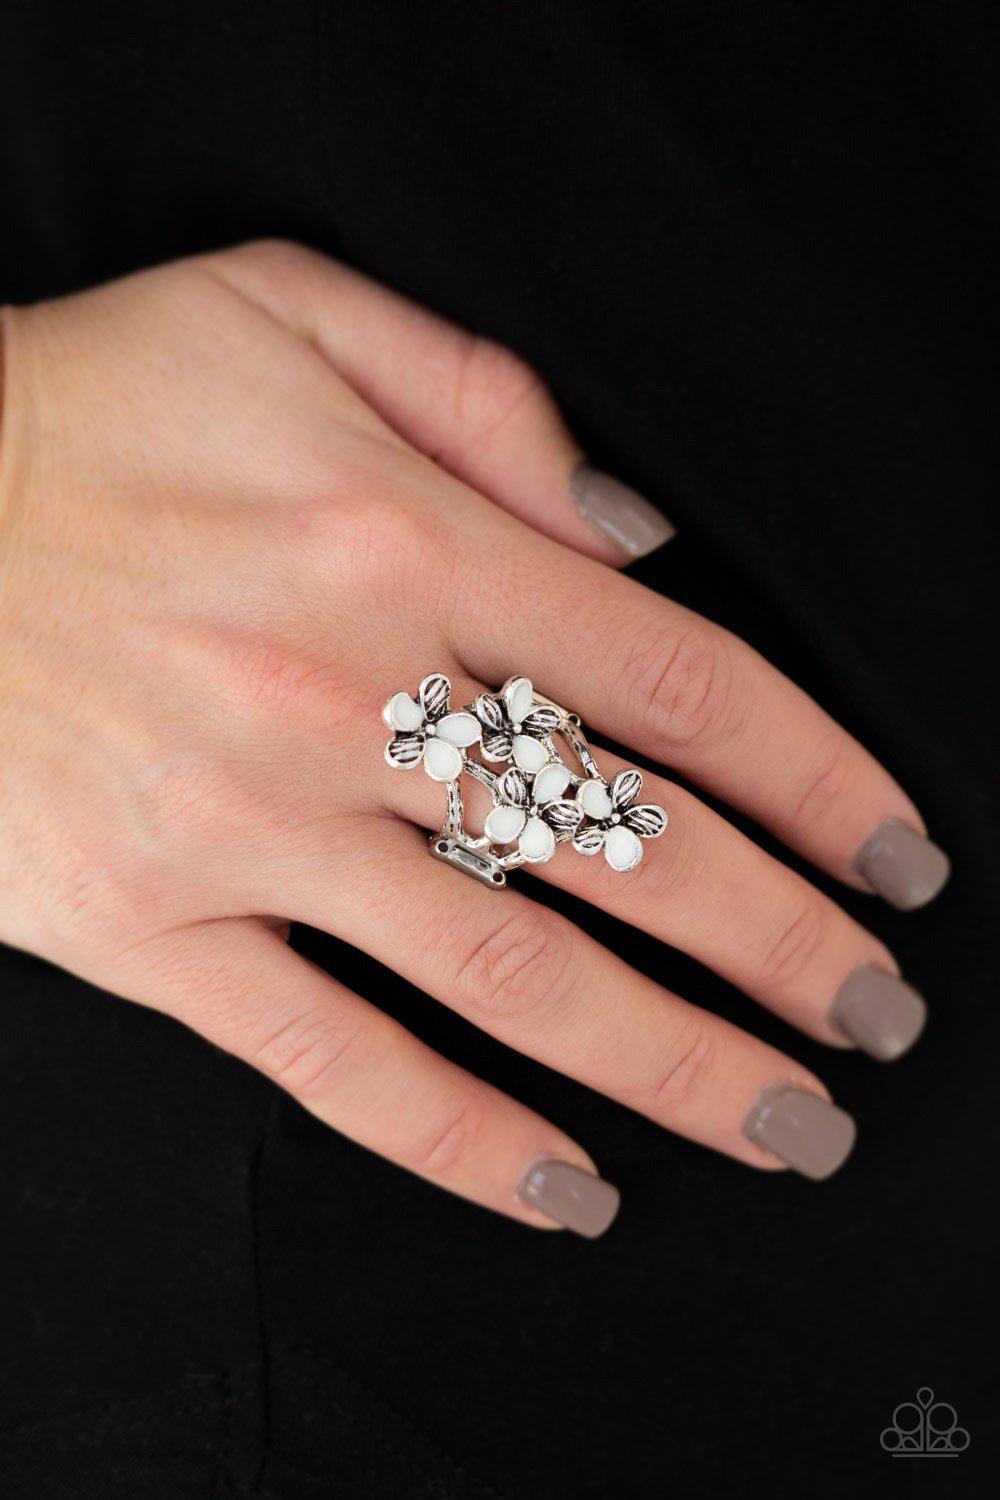 Climbing Gardens White Flower Ring - Paparazzi Accessories - model -CarasShop.com - $5 Jewelry by Cara Jewels